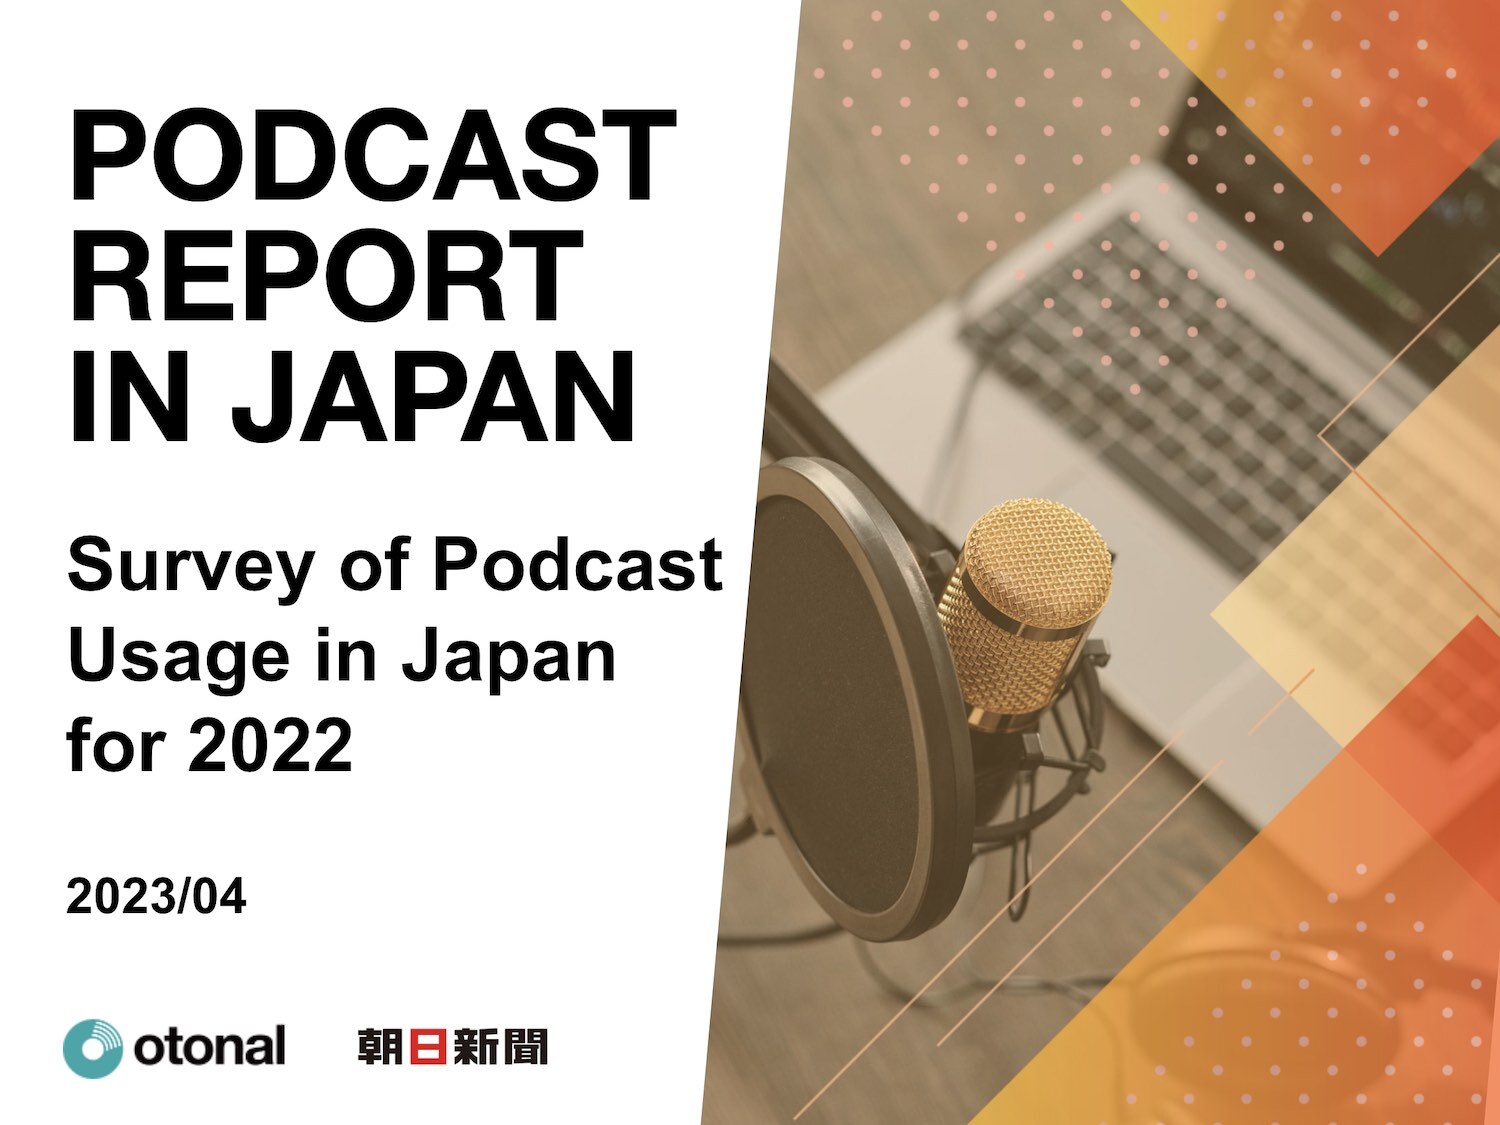 PODCAST REPORT IN JAPAN Survey of Podcast Usage in Japan (2022)